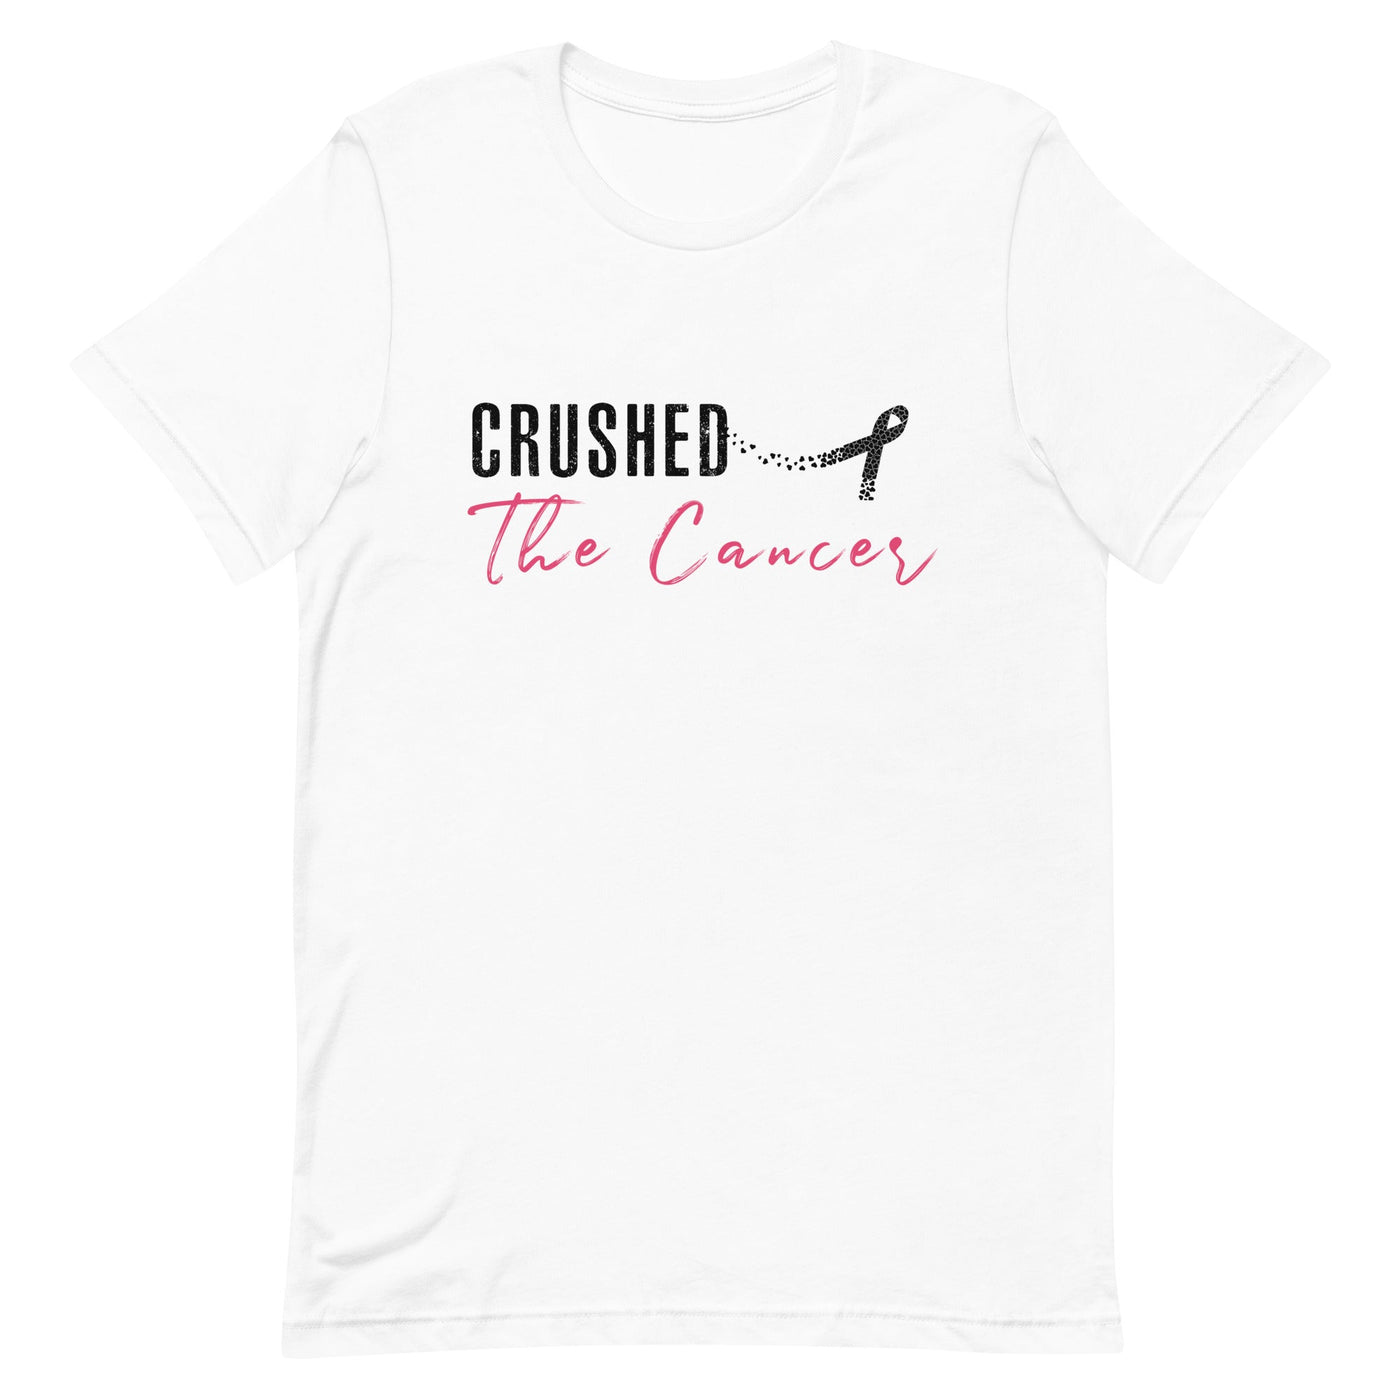 CRUSHED THE CANCER WOMEN'S T-SHIRT- BLACK AND PINK FONT White S 